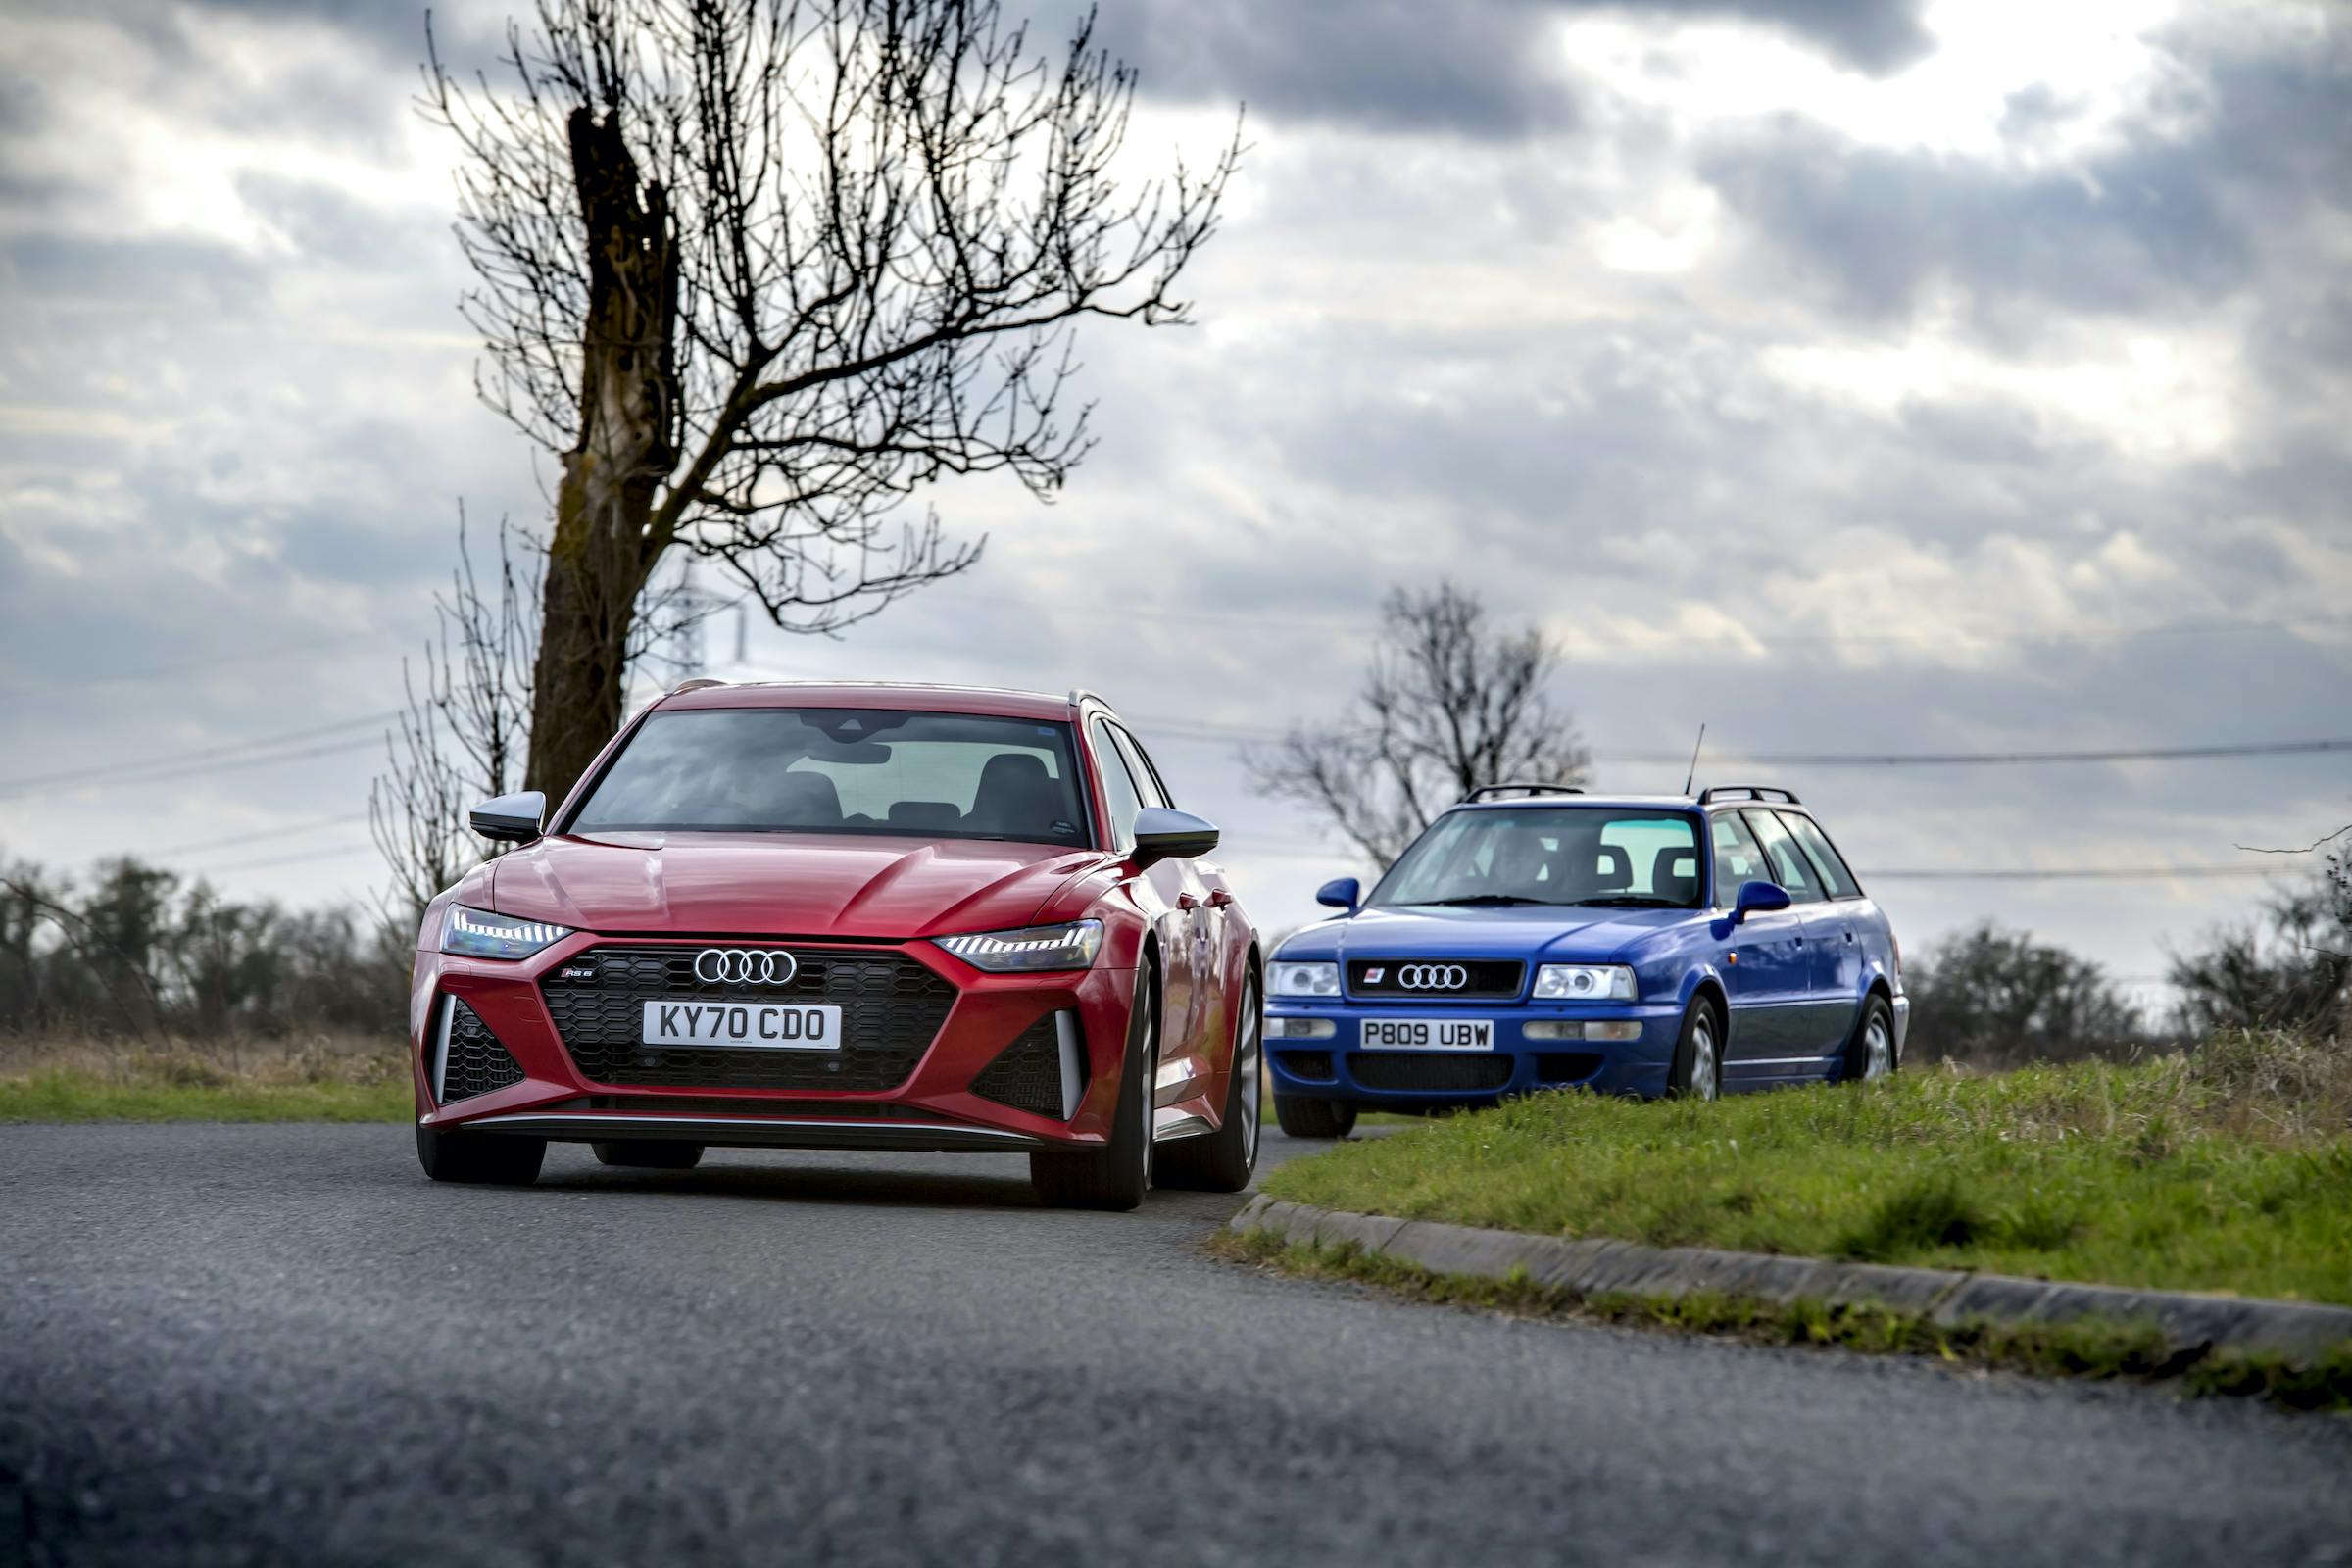 Audi RS6 leading RS2 cornering driving action